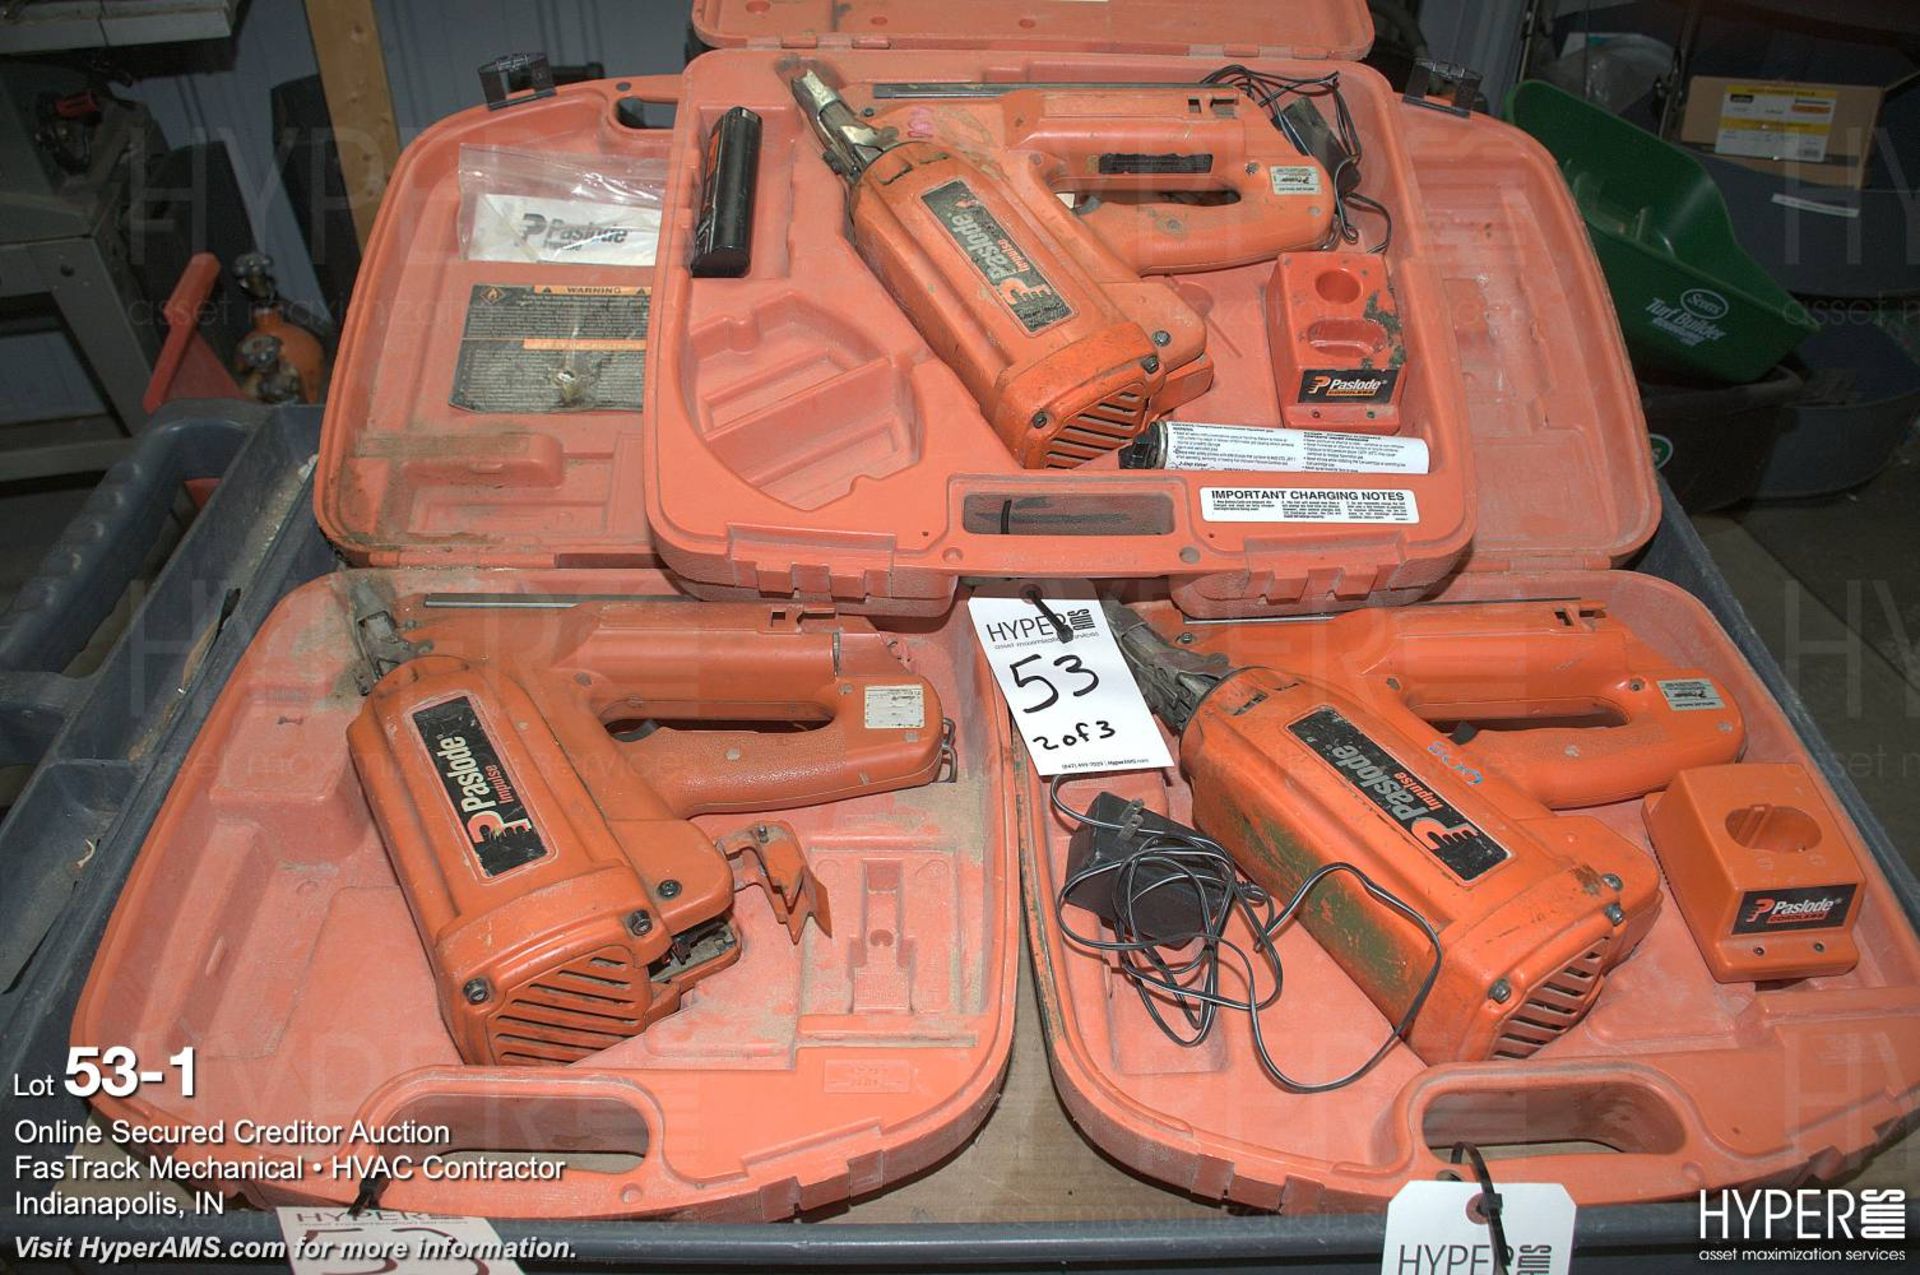 (3) Paslode Impulse nailers (2) chargers, more